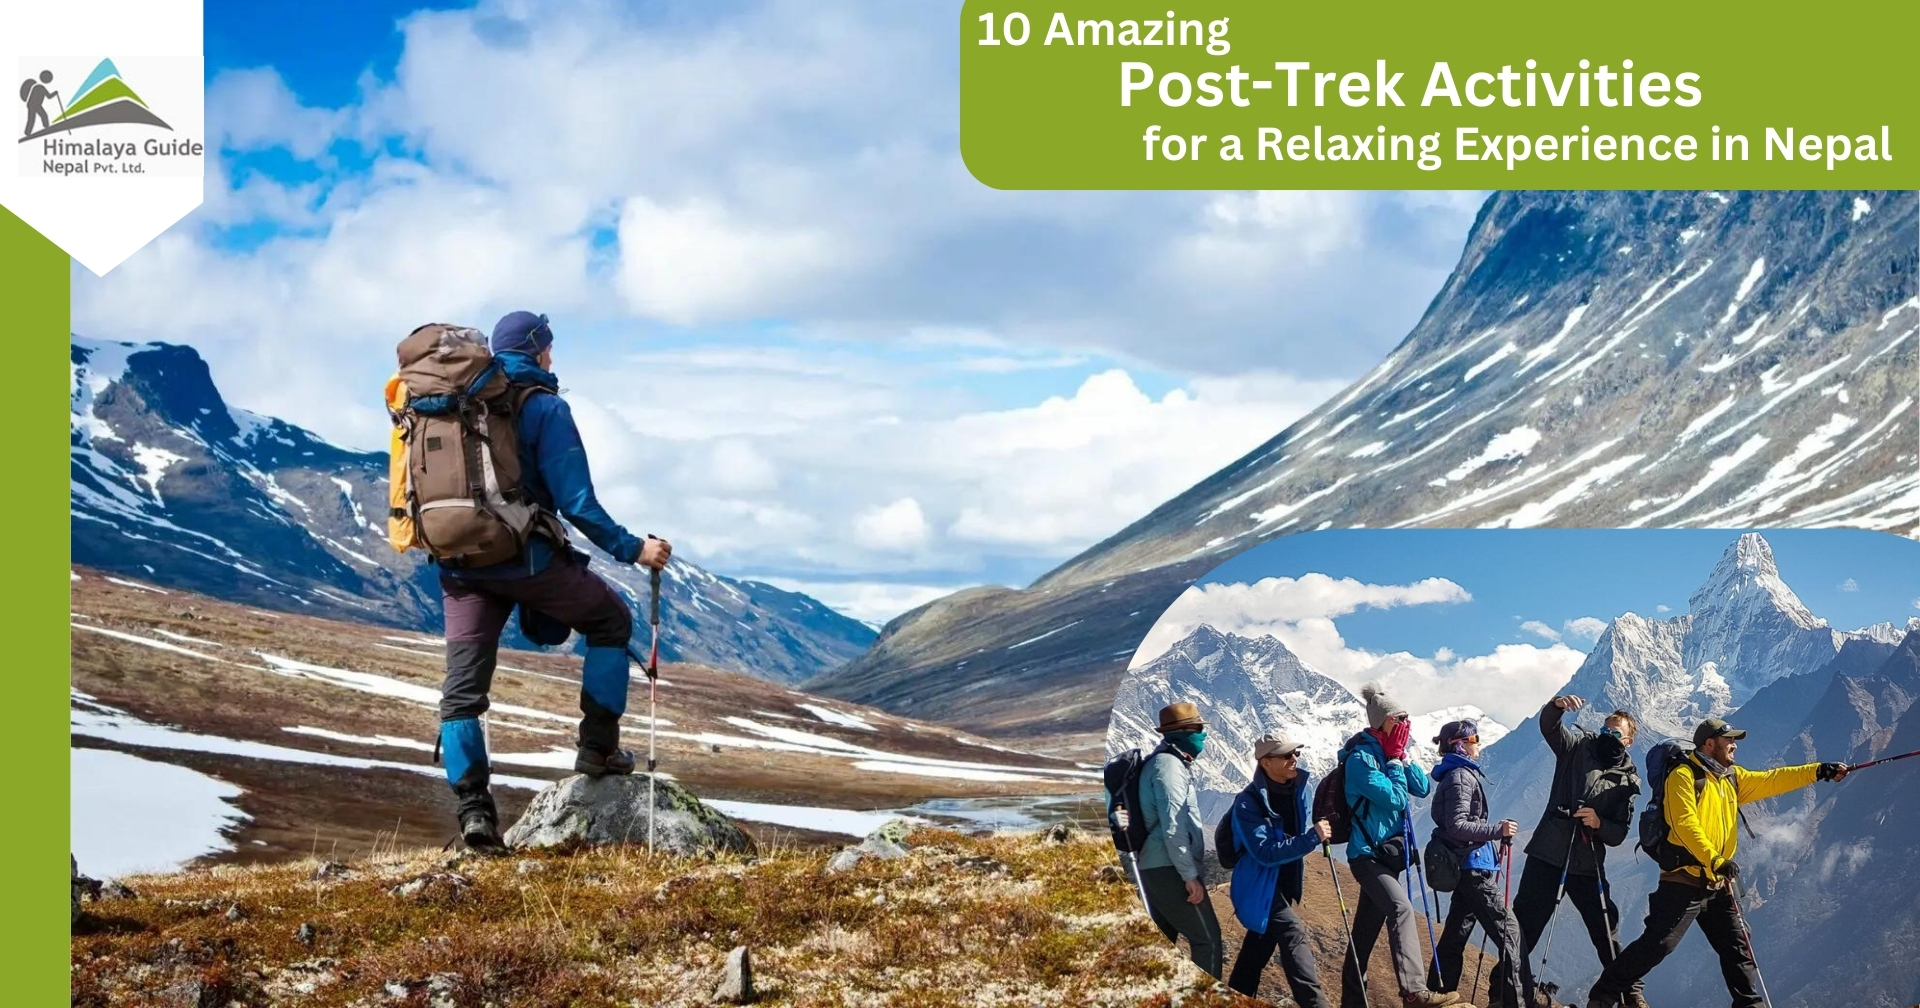 10 Amazing Post-Trek Activities for a Relaxing Experience in Nepal  